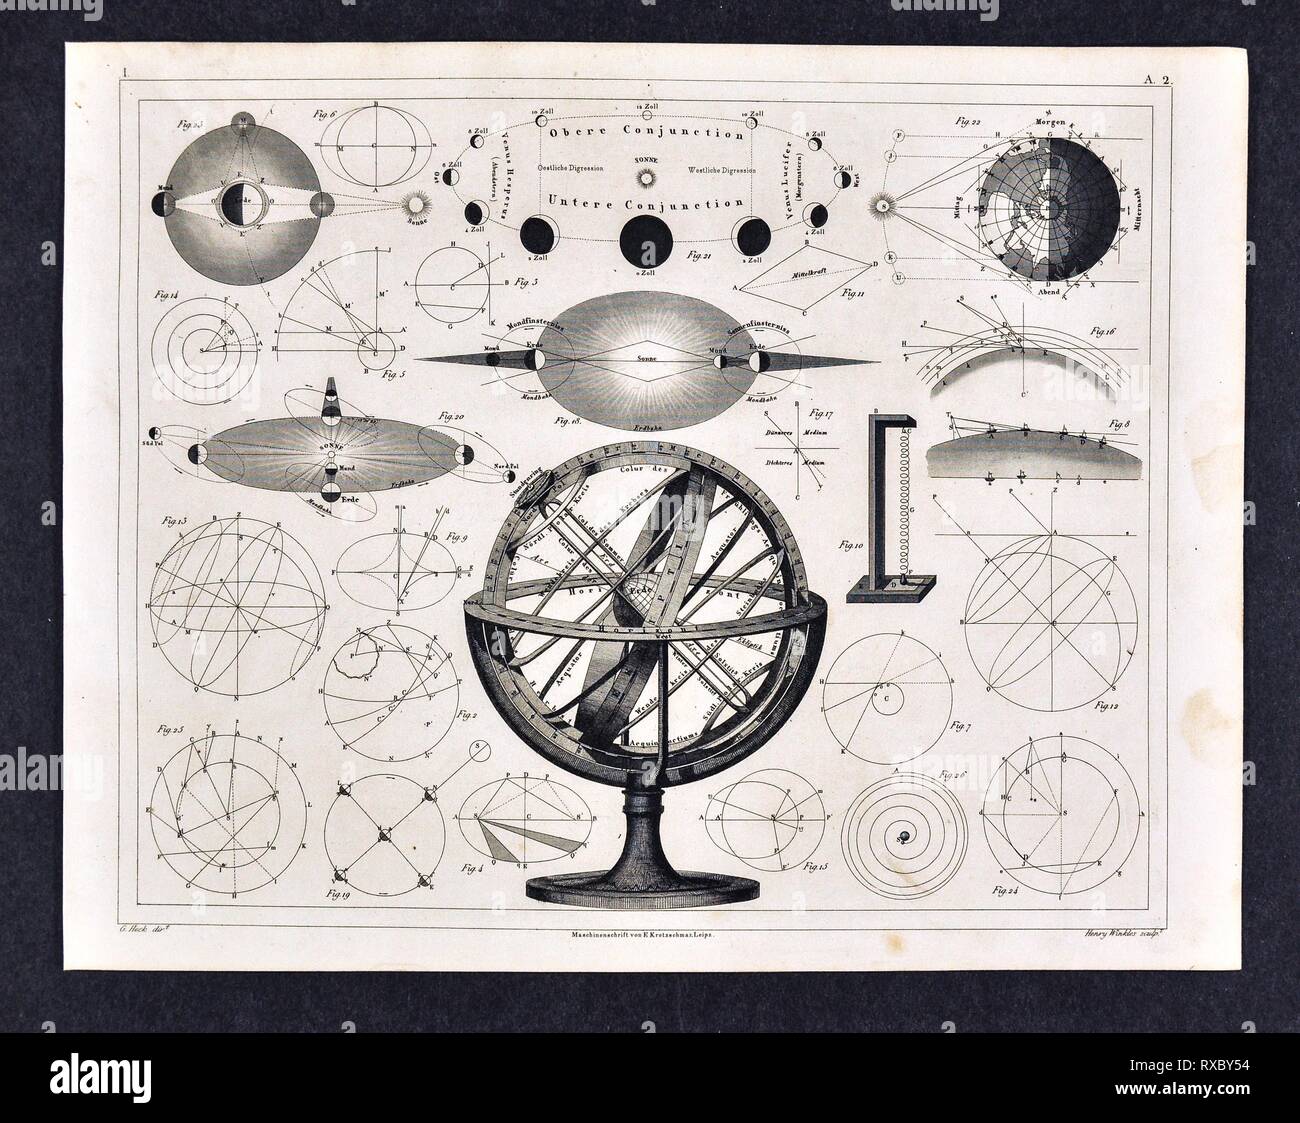 1849 Bilder Astronomy Print with an Armillary Sphere or Antique Model of the Solar System and the affects of the Sun, Moon and Earth on Eclipses and Physical diagrams regarding Rotations and Orbits Stock Photo